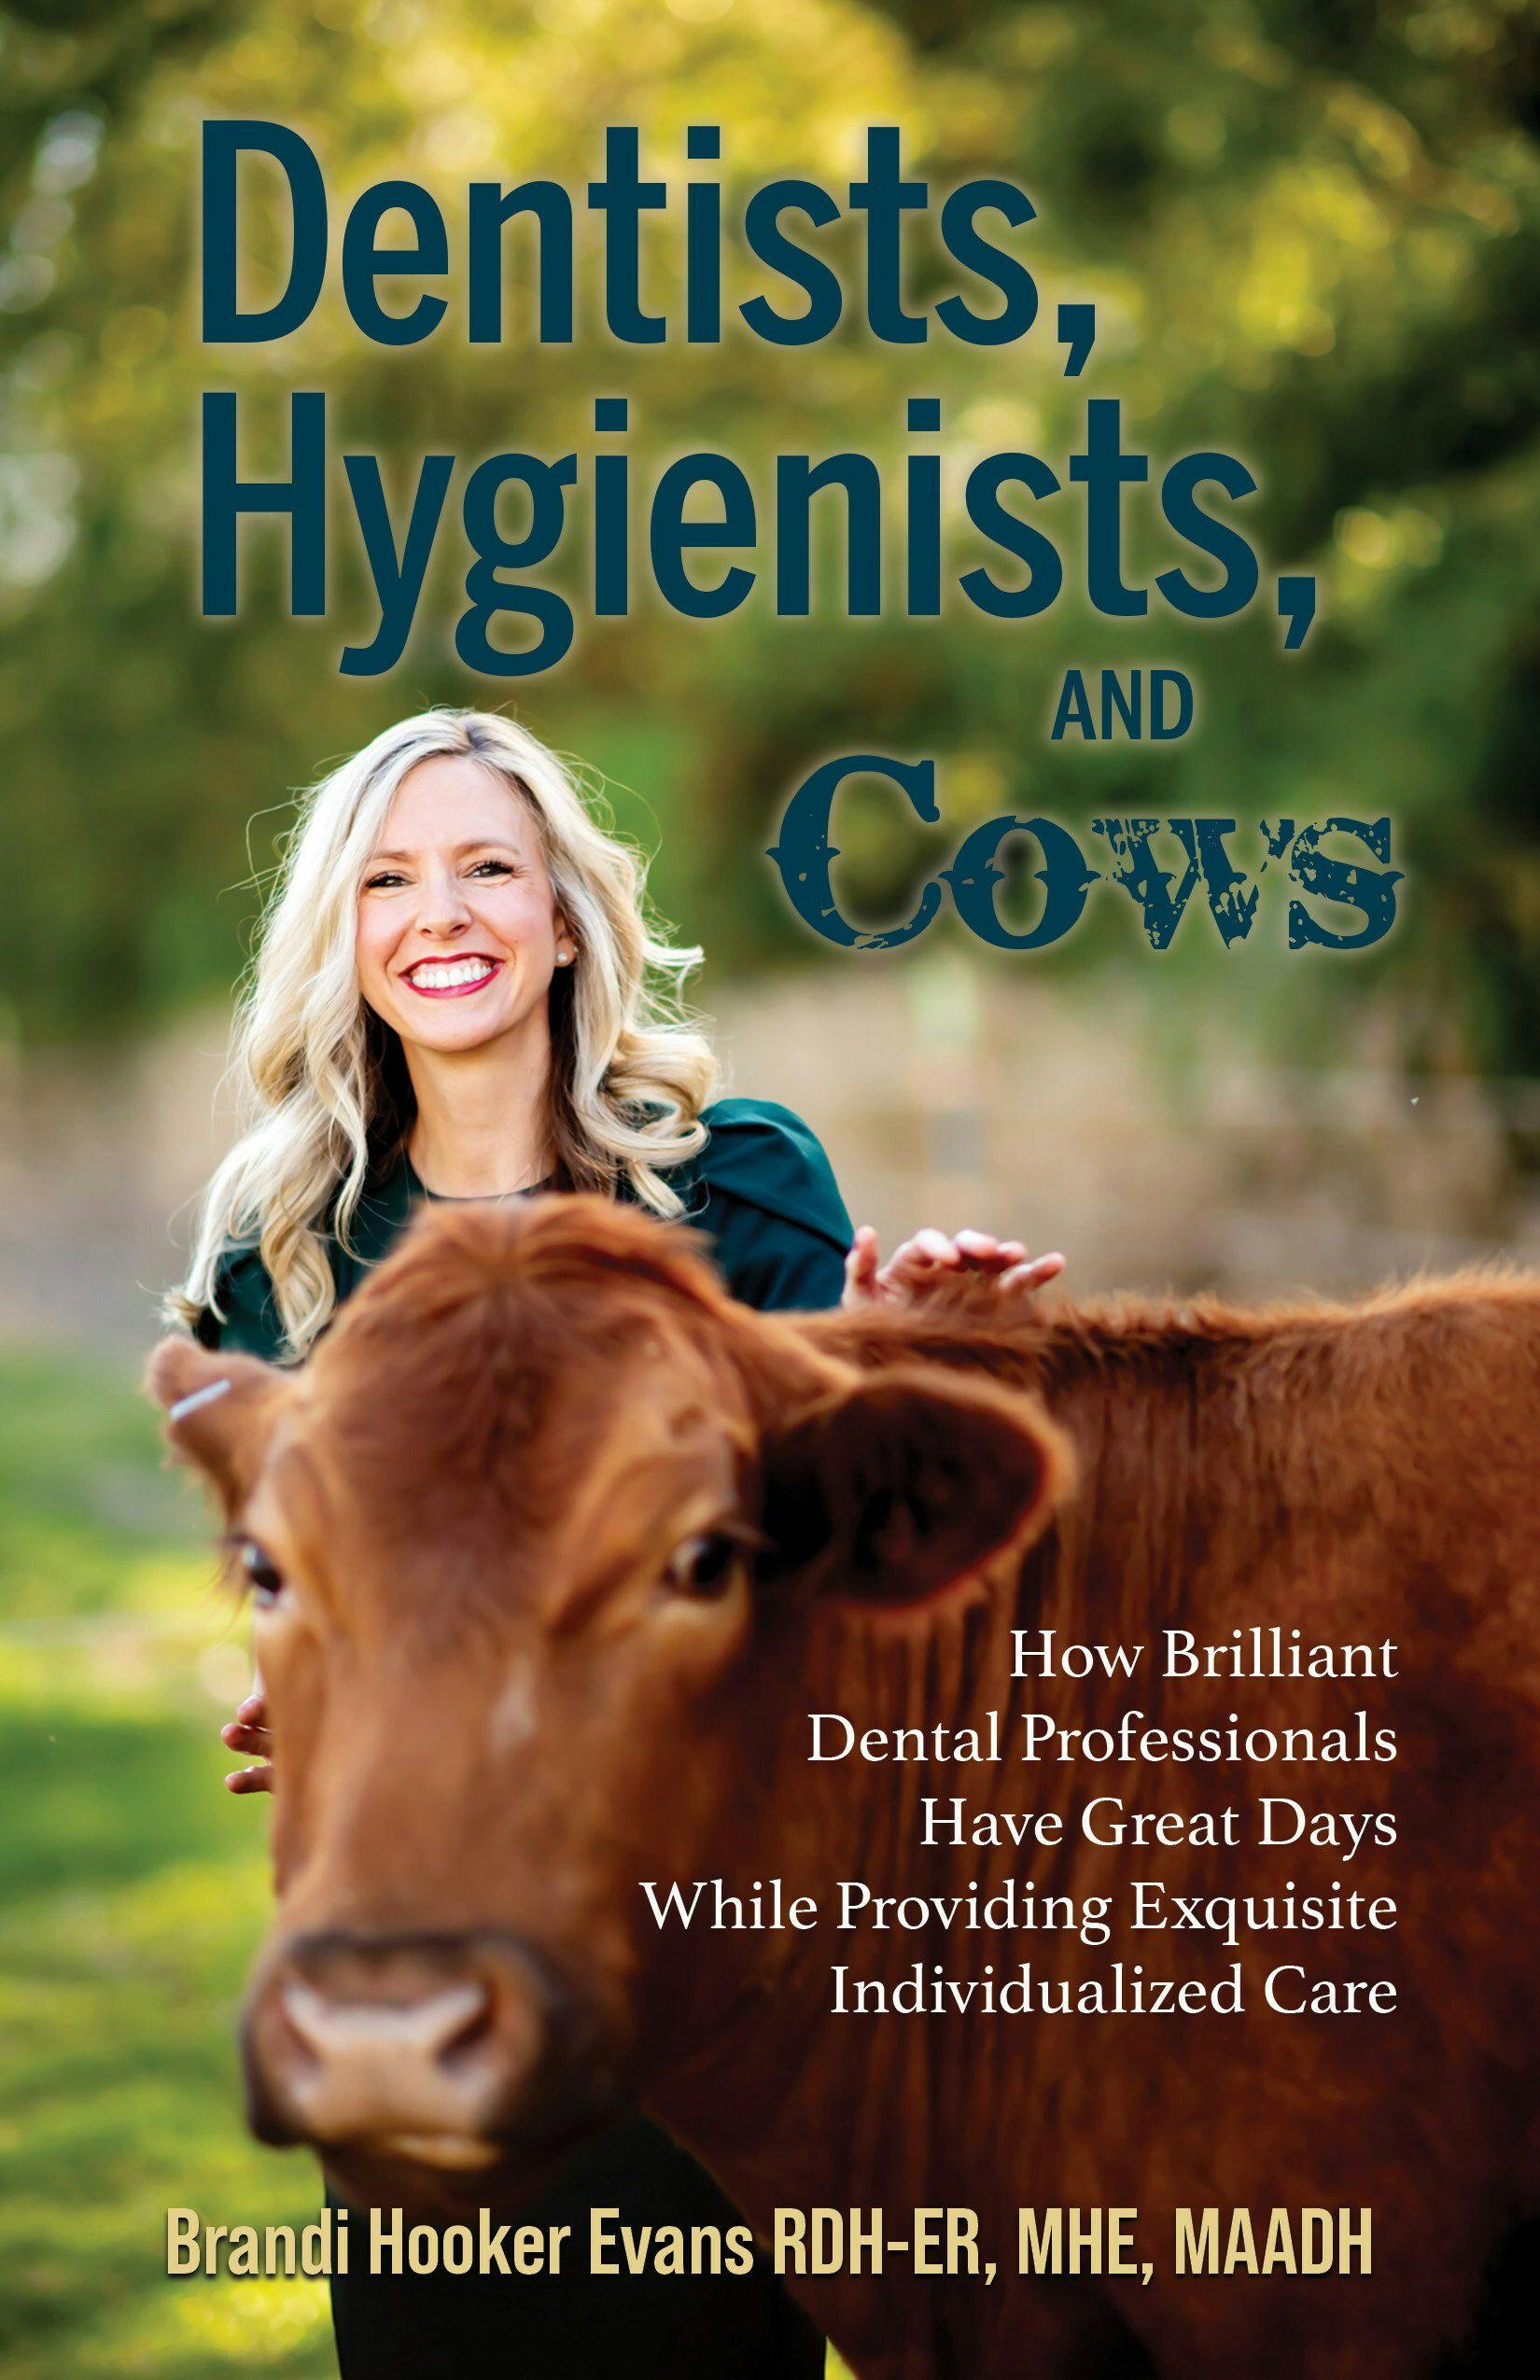 Hygiene Expert Shares 5 Ways Your Dental Hygienist Can Save Your Life in New Book | Image Credit: © Brandi Hooker Evans